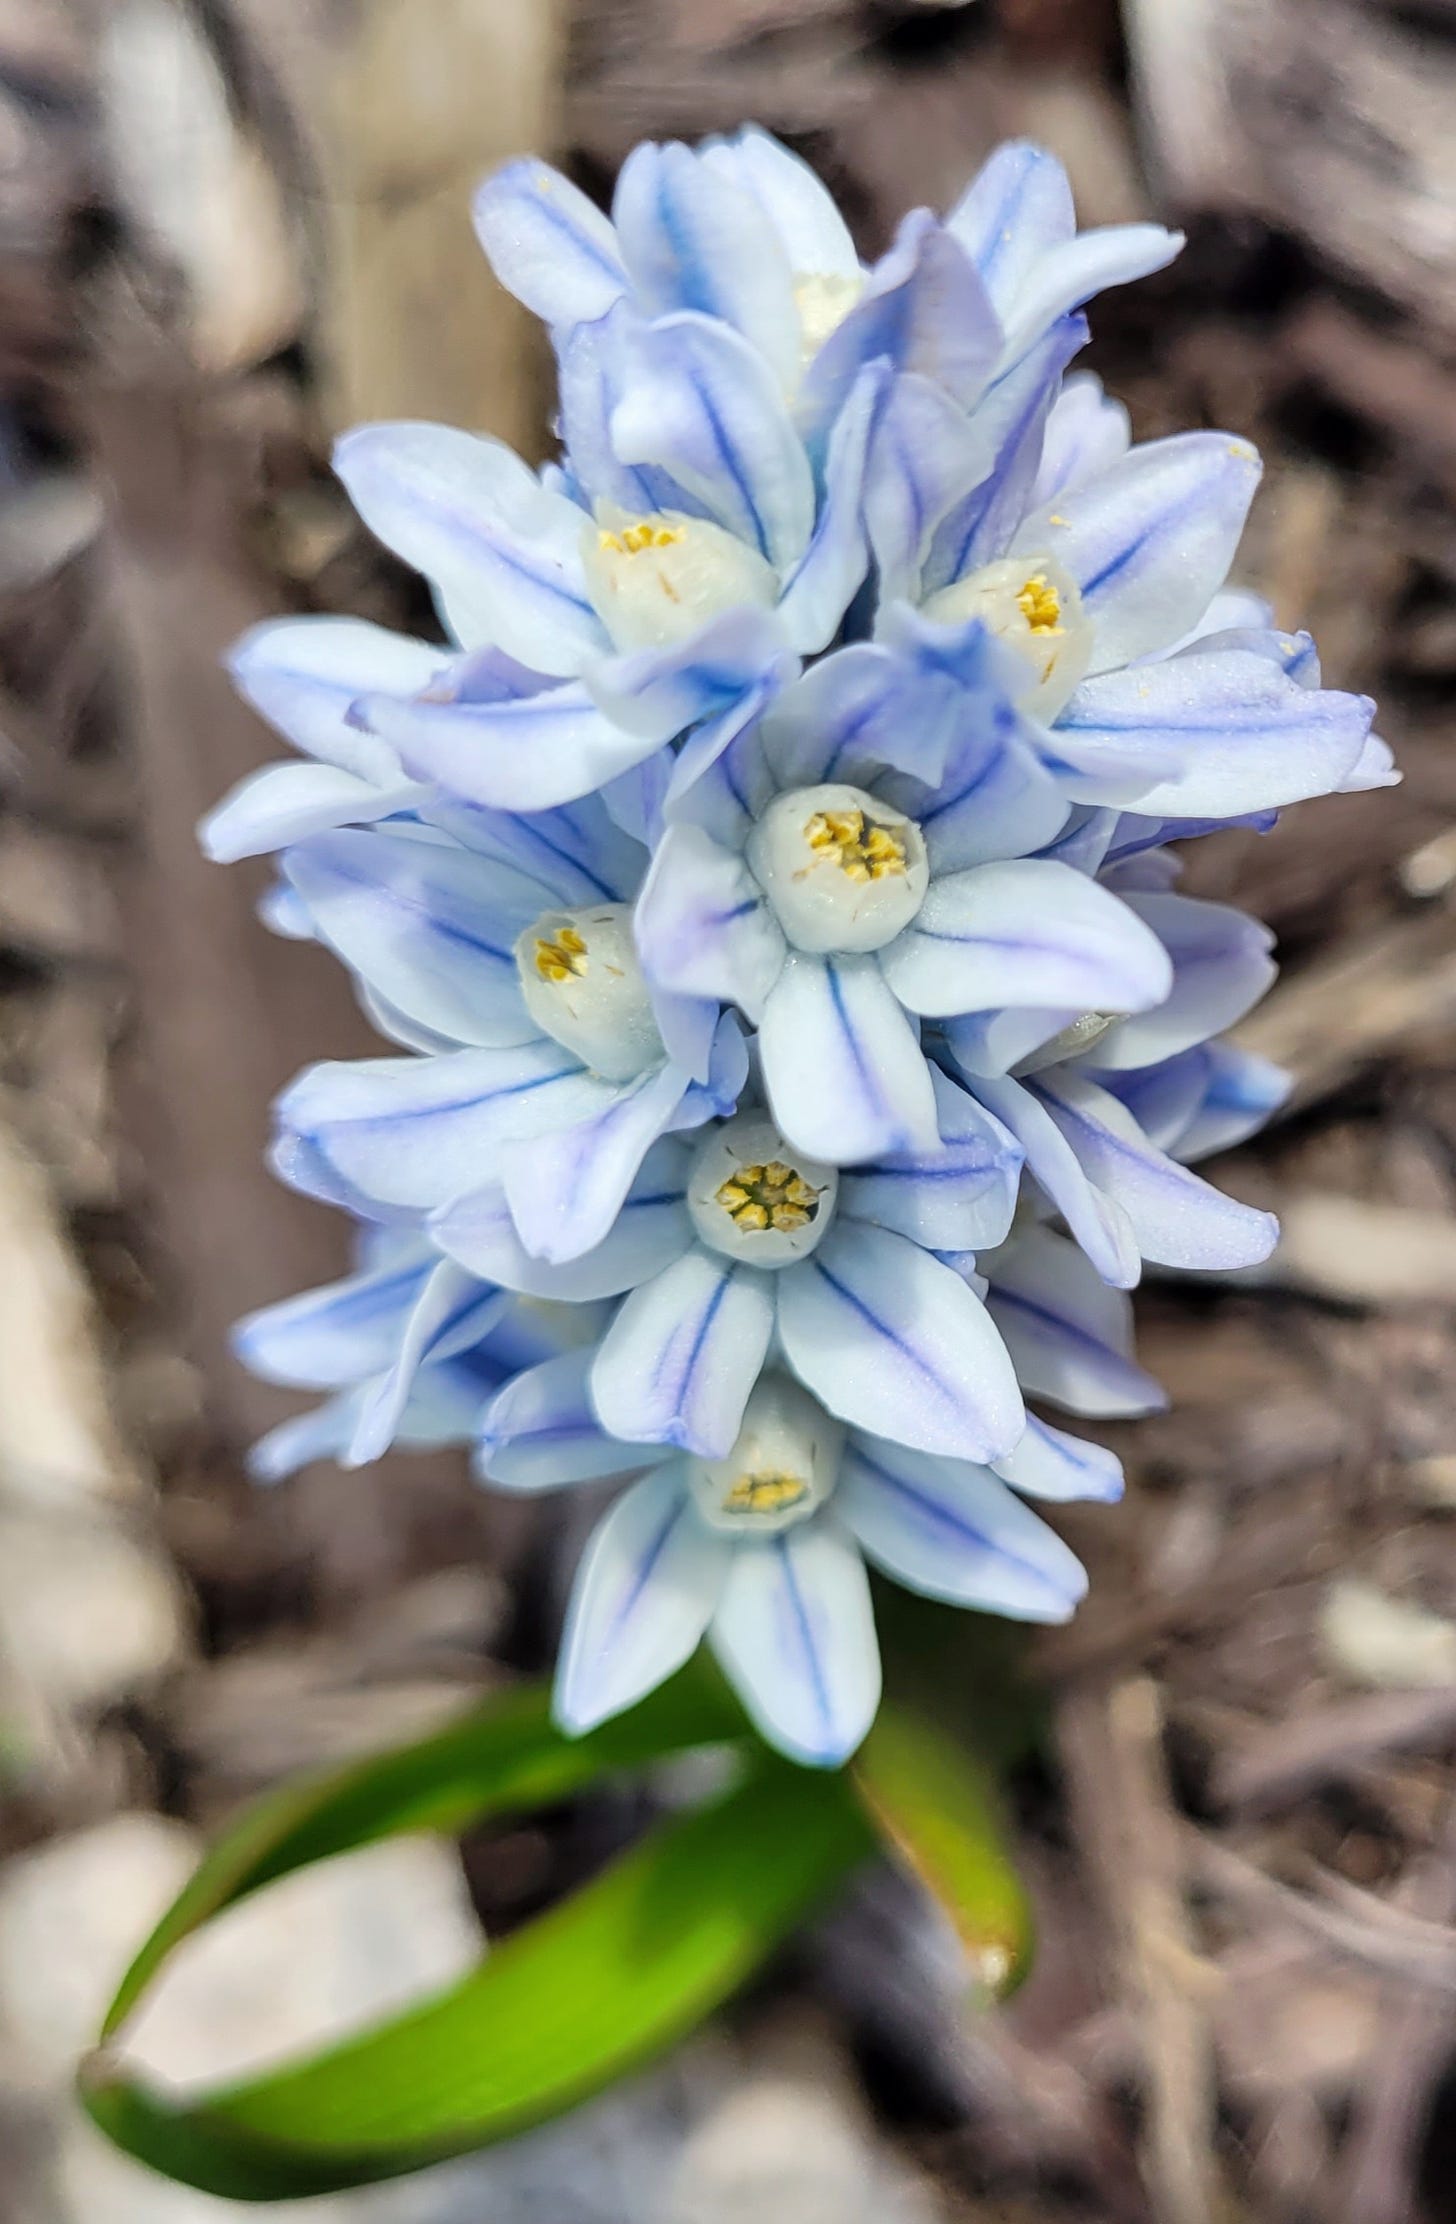 Striped squill flower in my garden; Icy blue with dark blue stripes down the middle of each petal